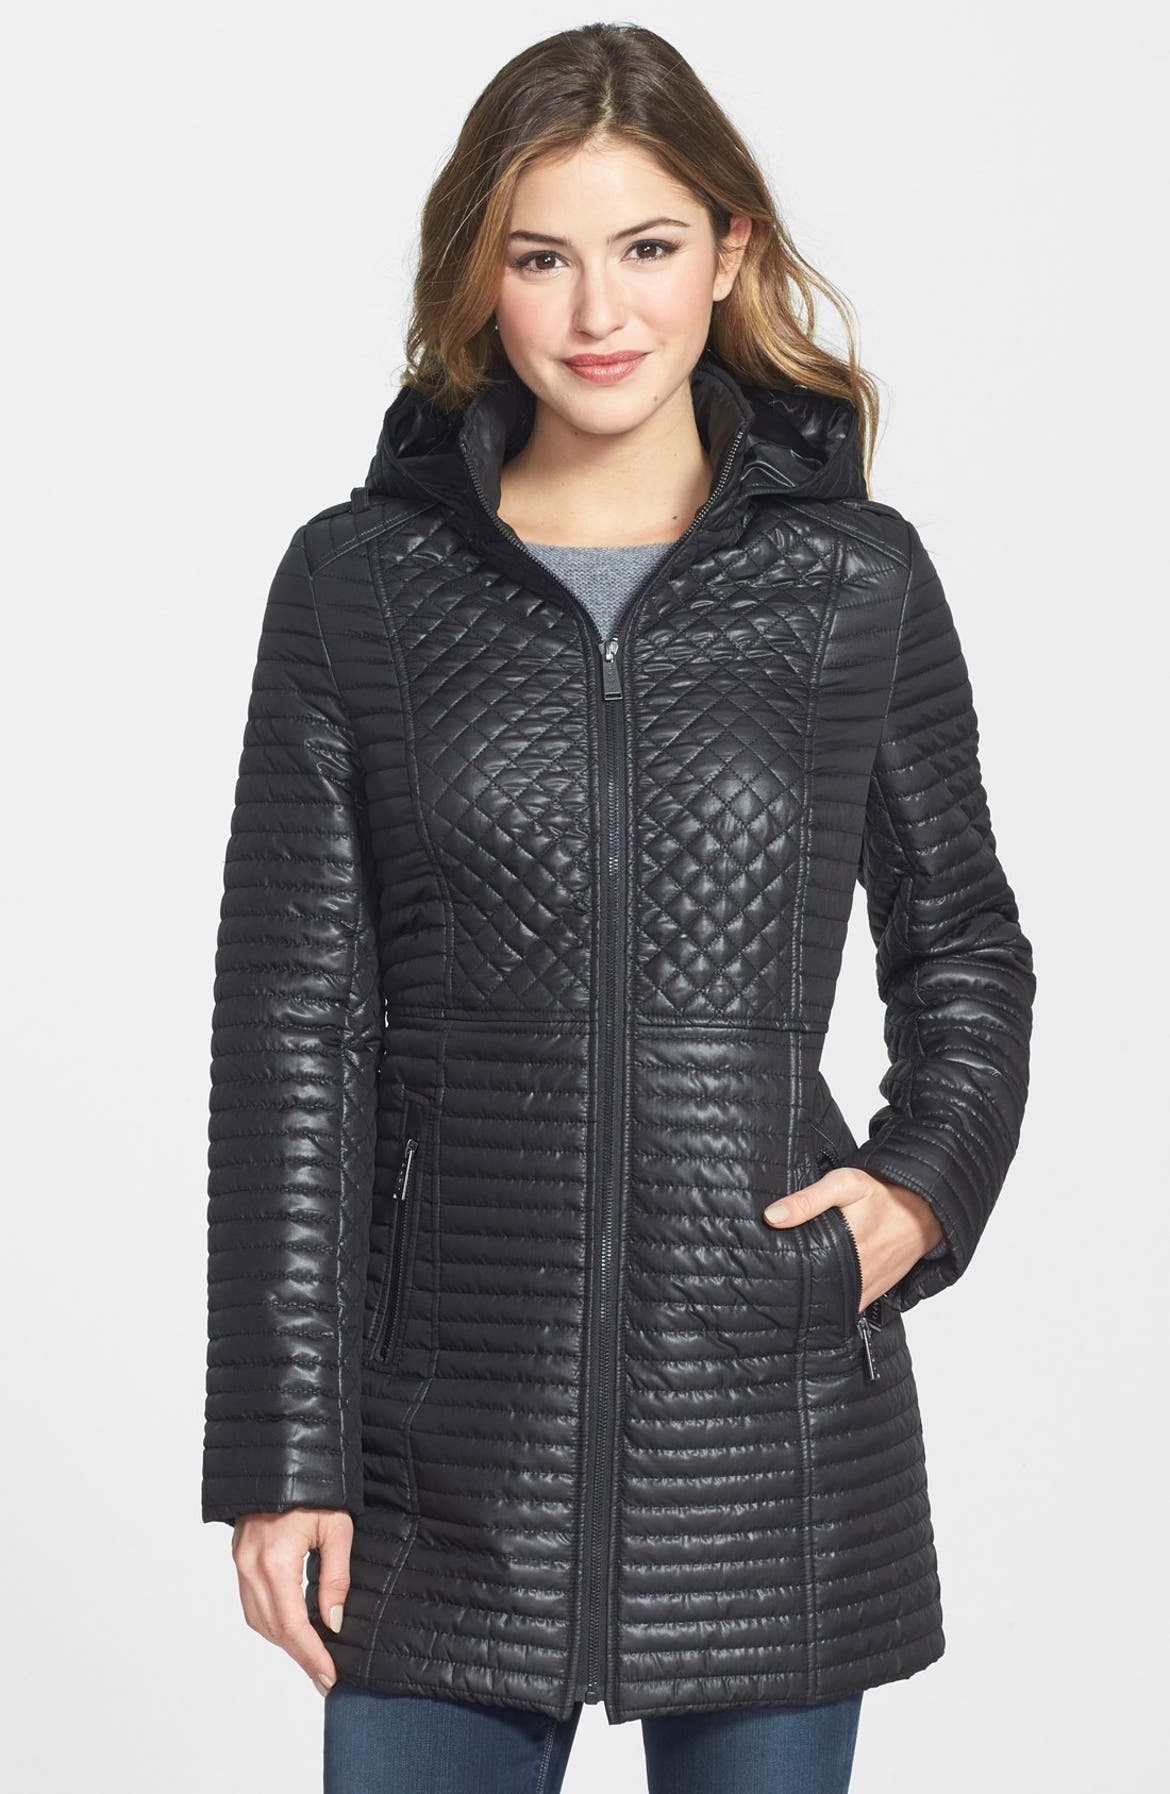 DKNY Quilted Coat with Detachable Hood | Nordstrom